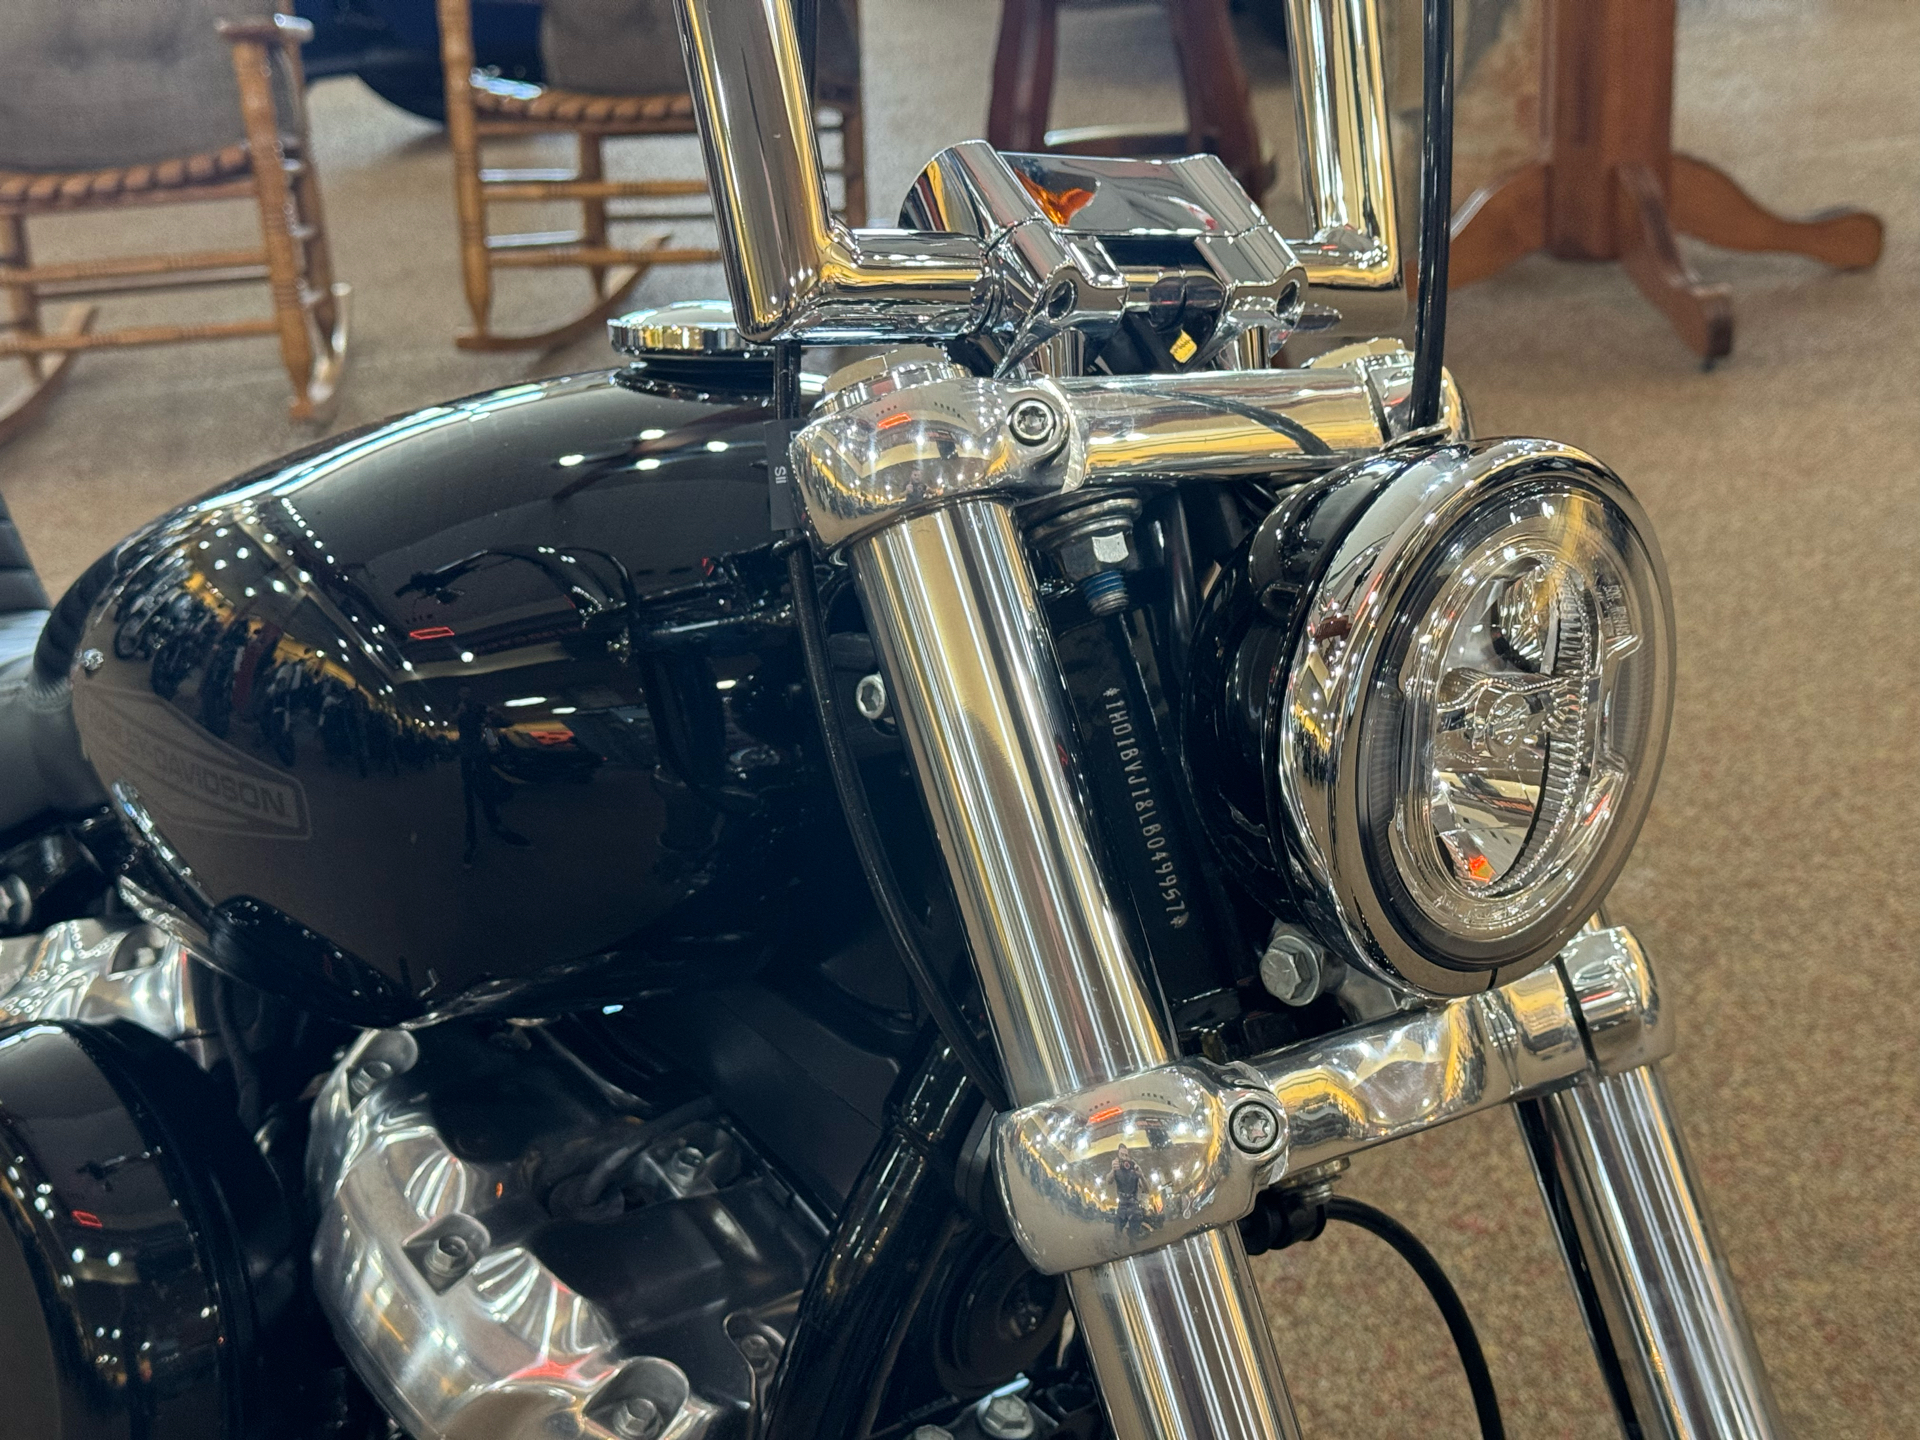 2020 Harley-Davidson Softail® Standard in Knoxville, Tennessee - Photo 3